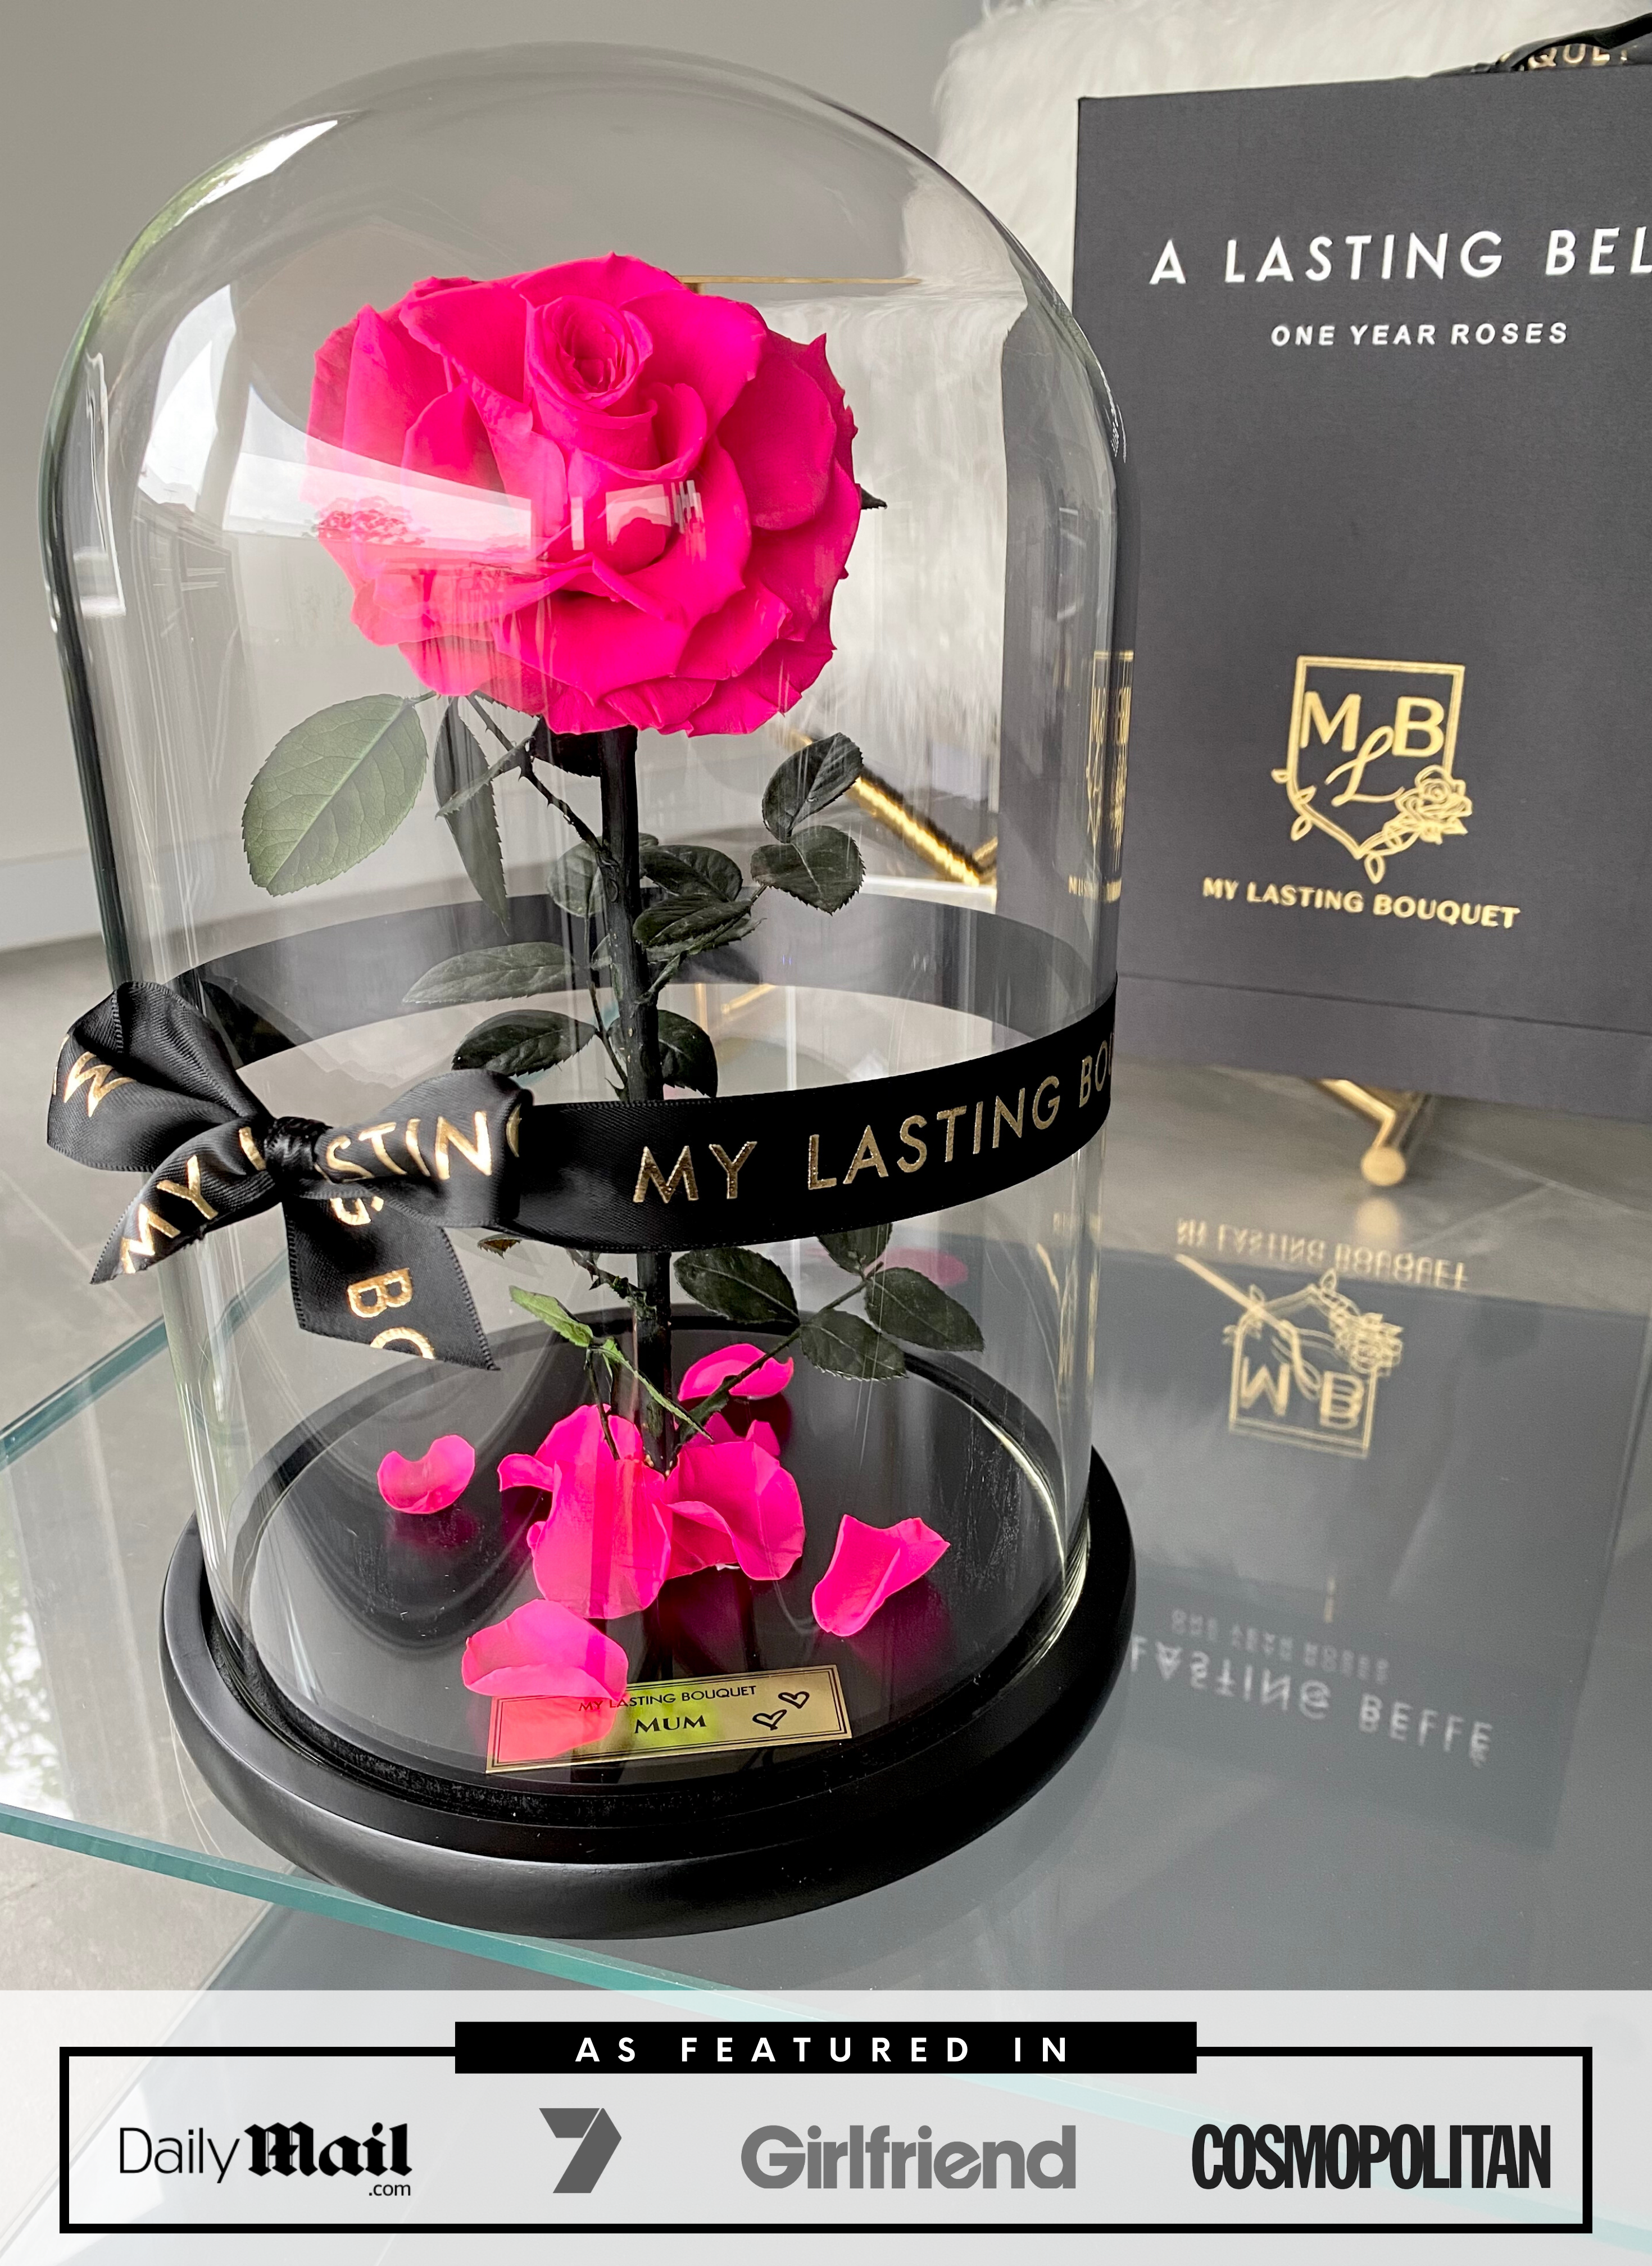 Hot Pink Lasting Belle - My Lasting Bouquet